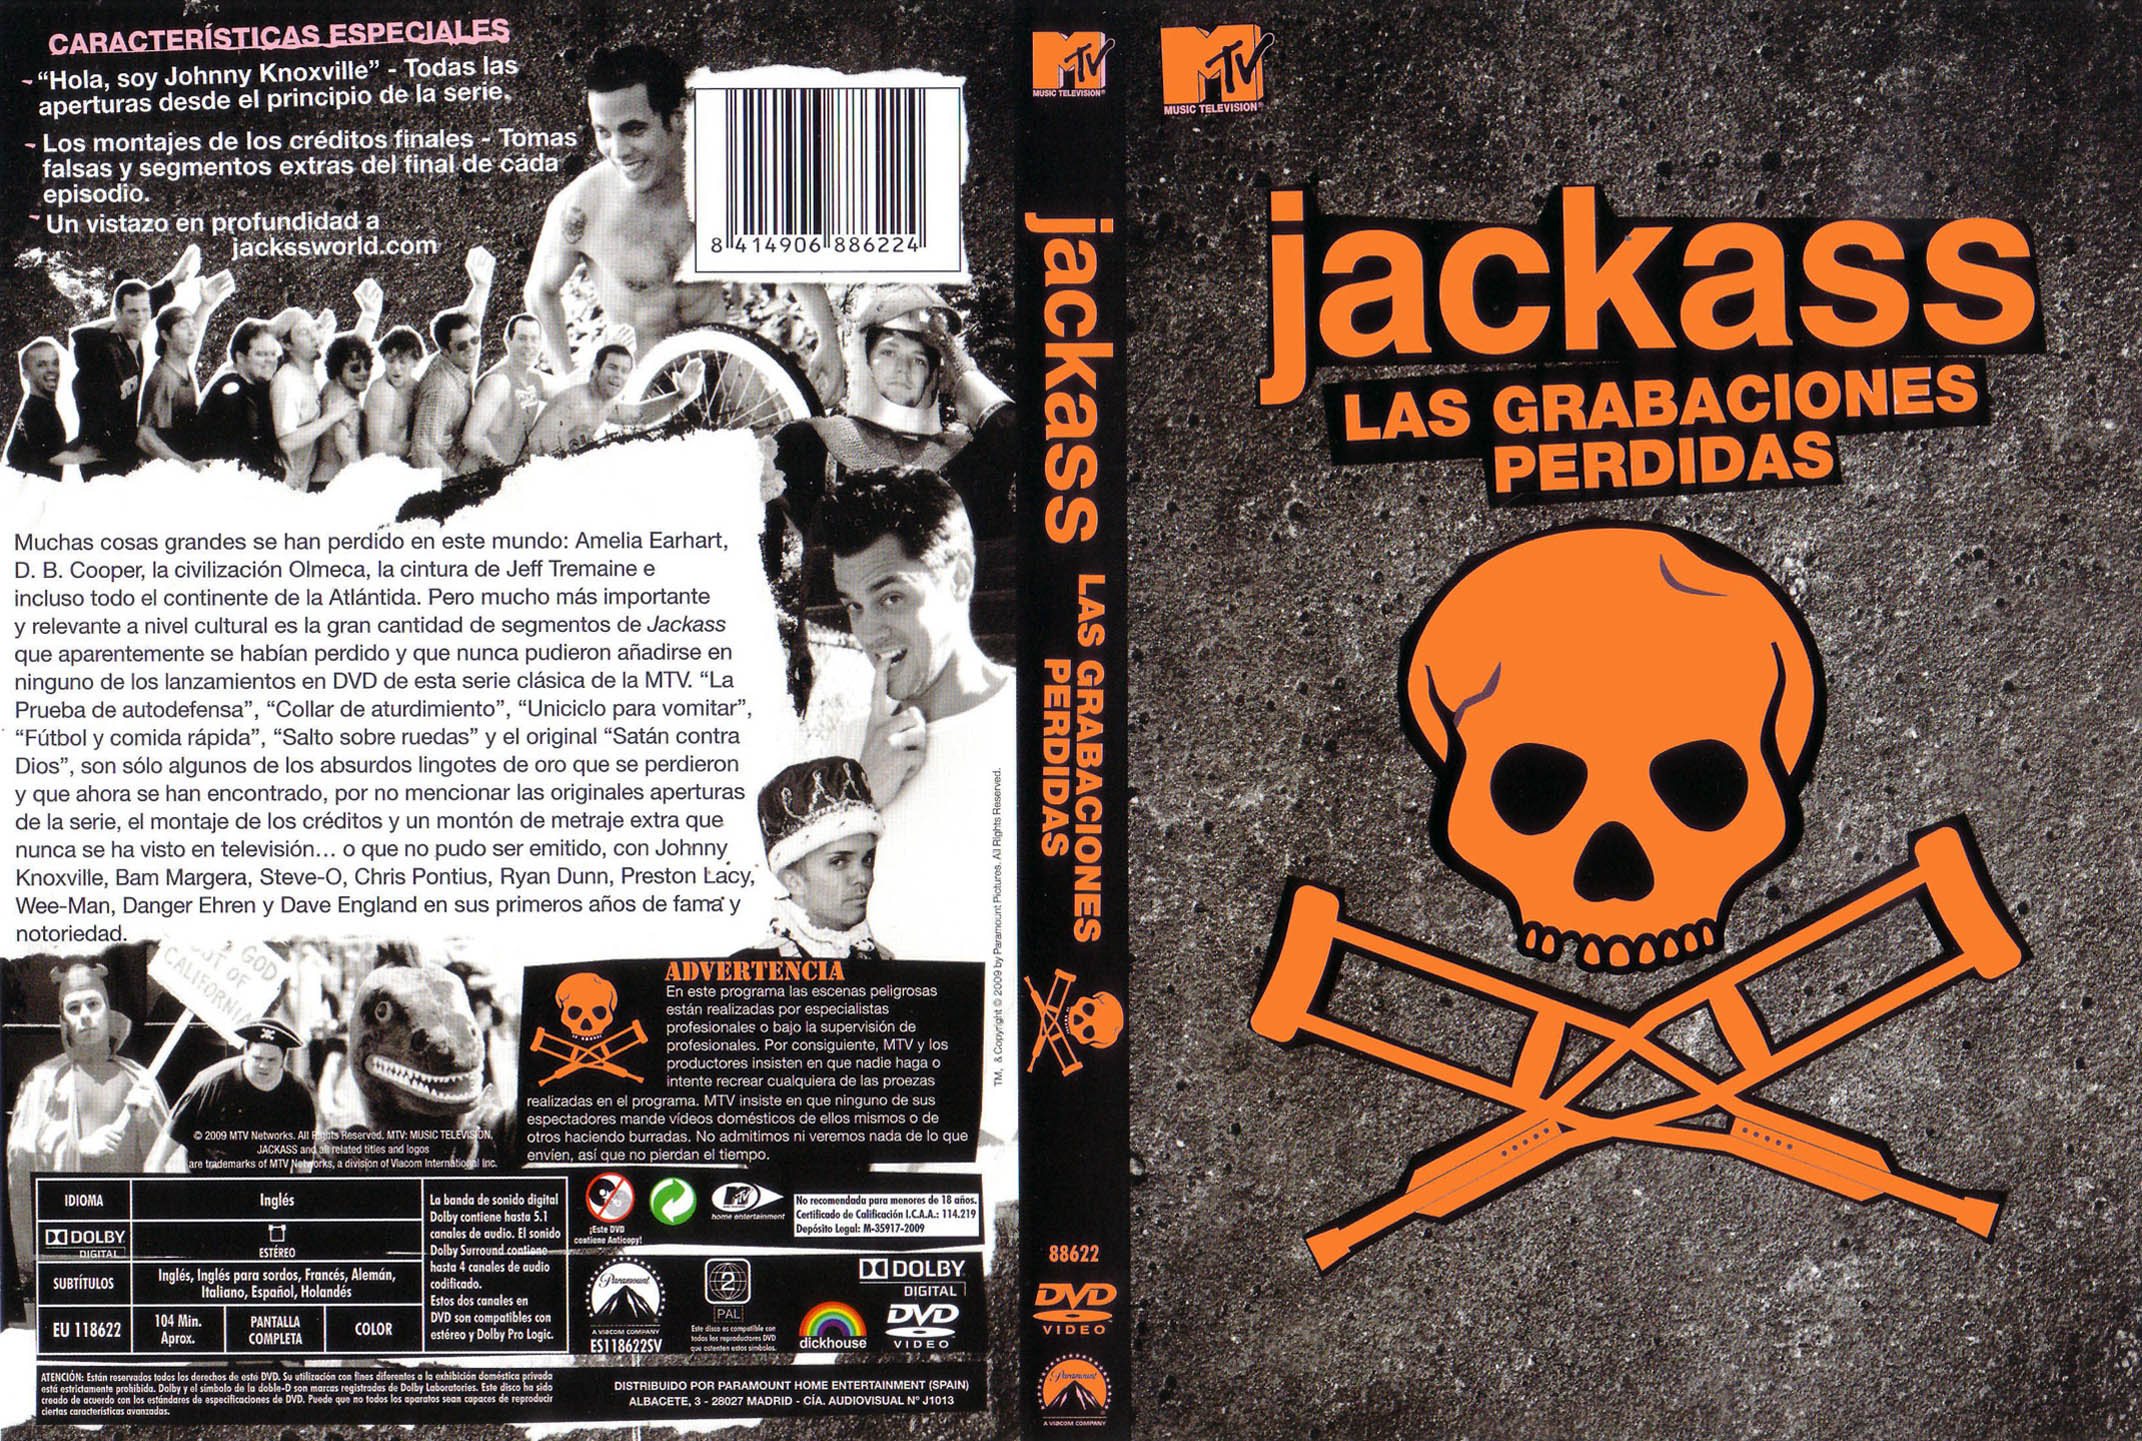 Jackass: The Lost Tapes #8